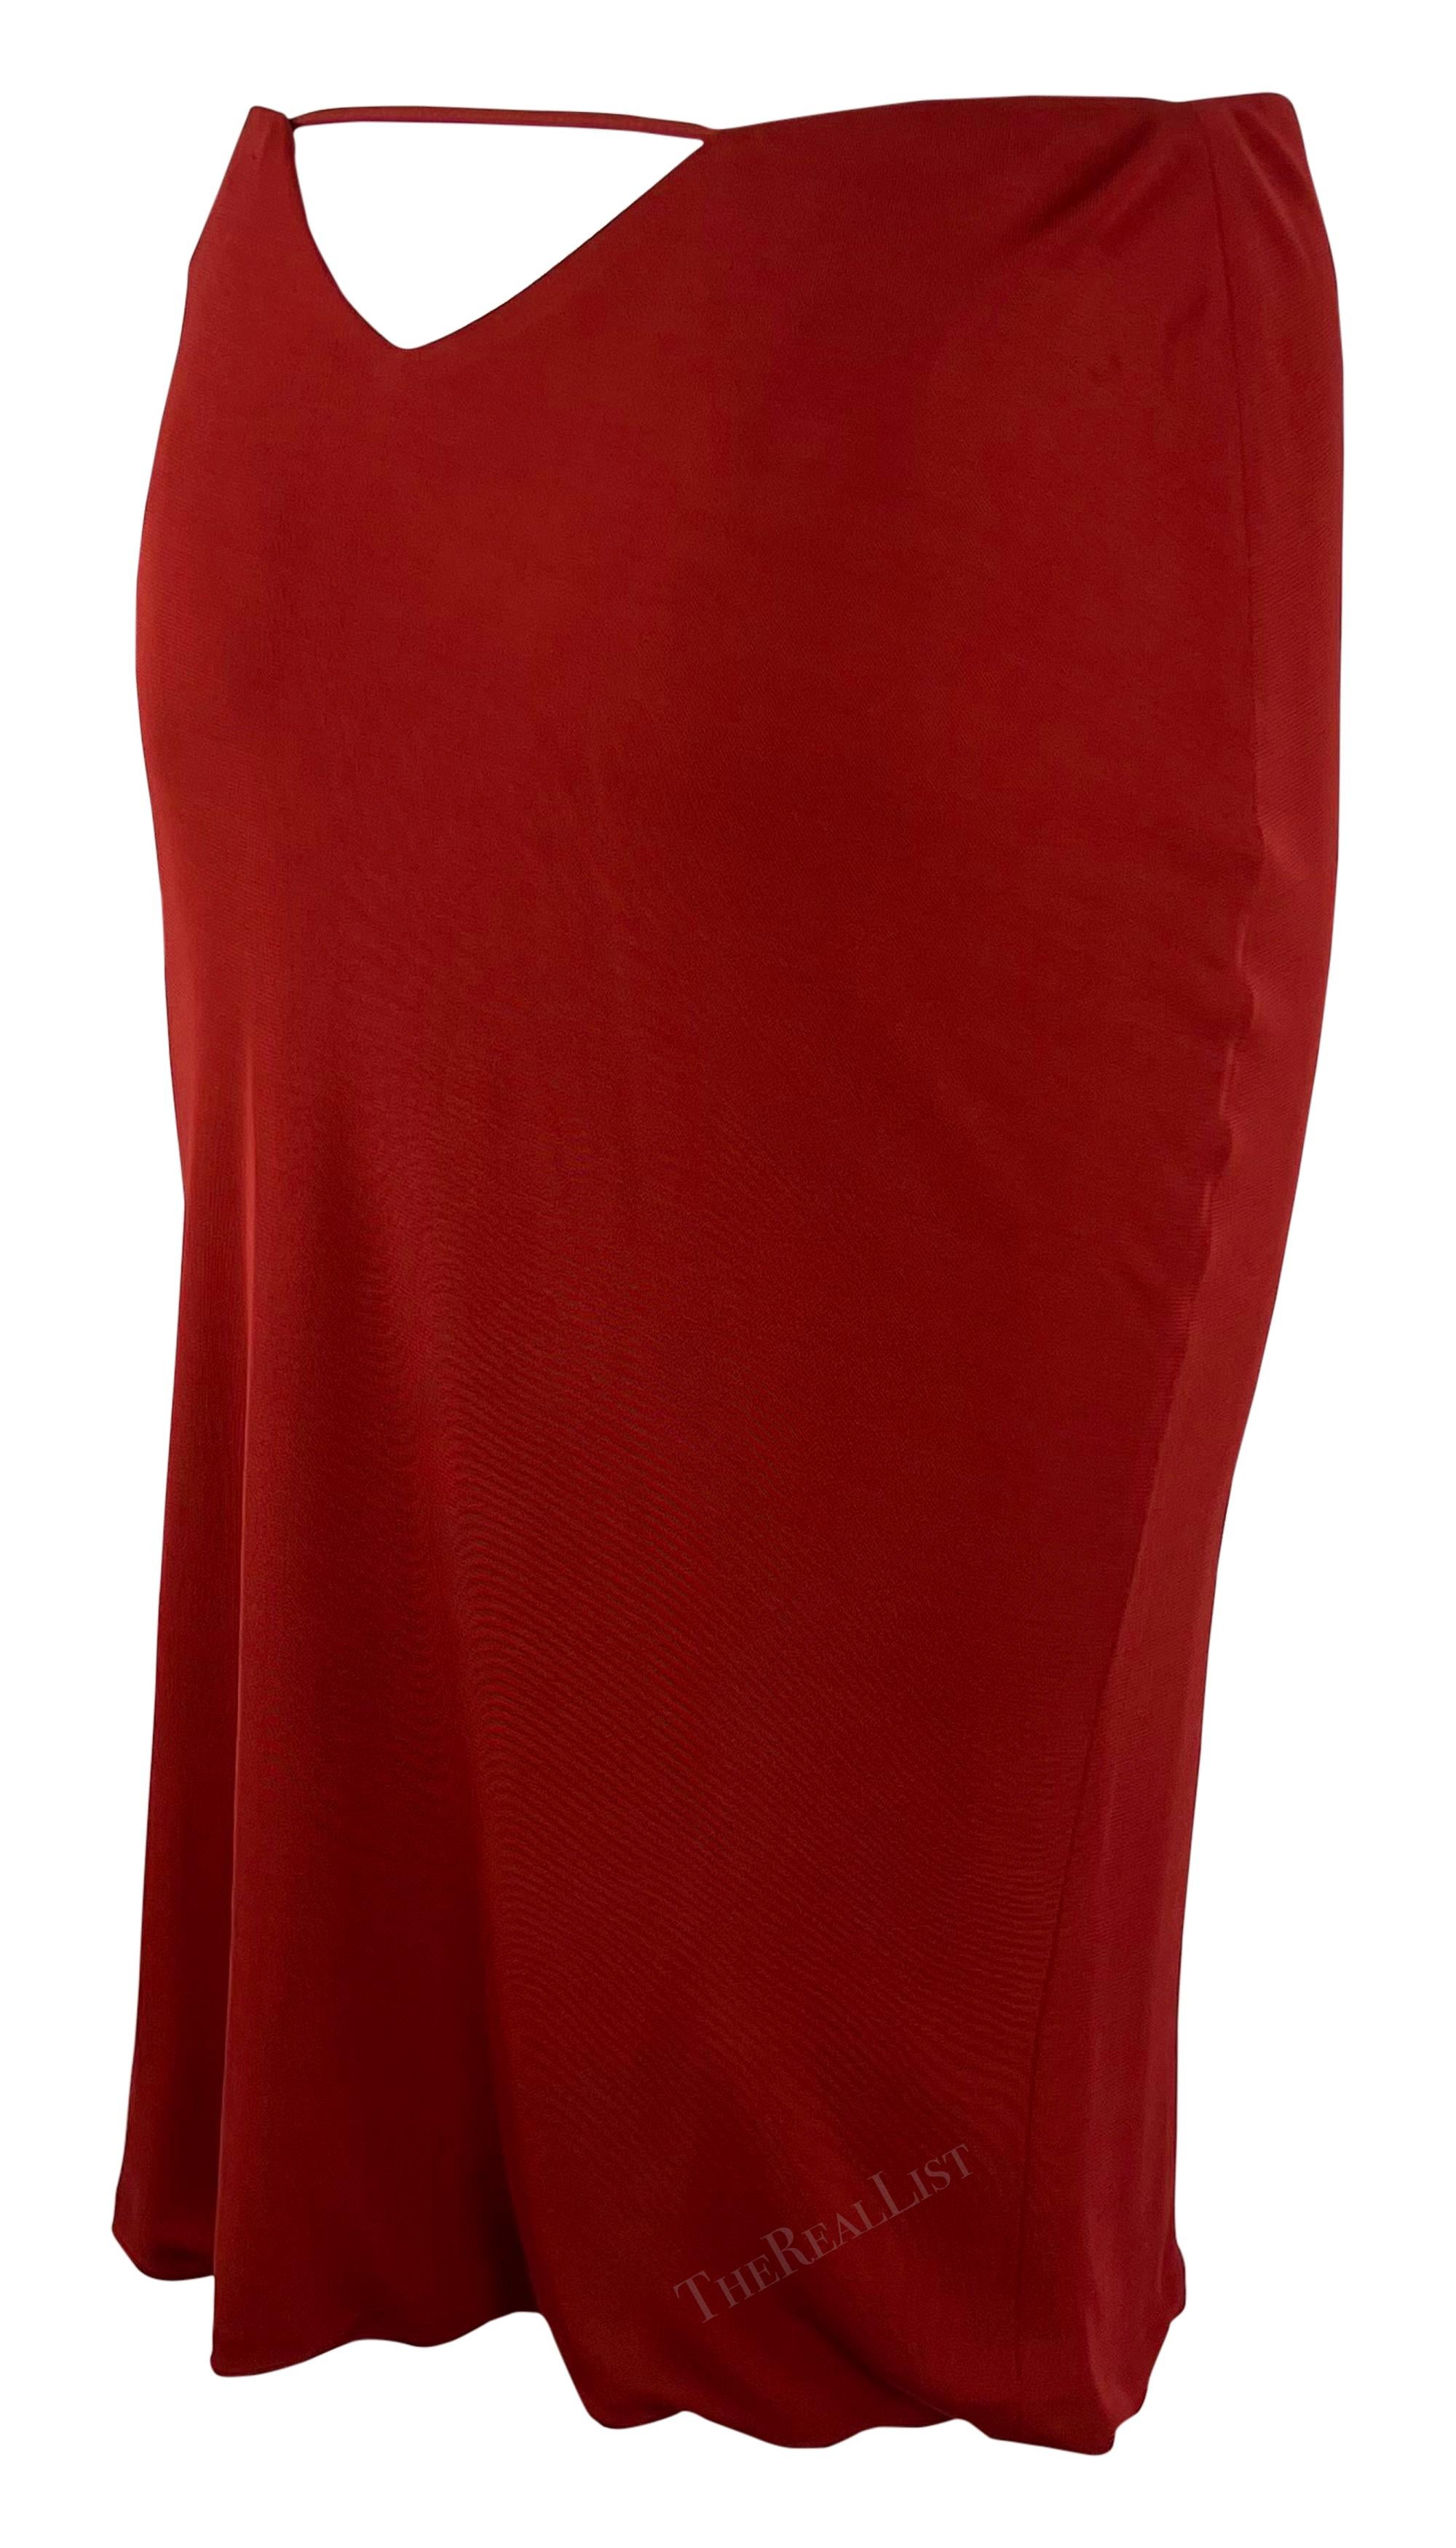 Presenting a fabulous red Yigal Azrouel stretch skirt. From the early 2000s, this form-fitting stretch skirt features a lightly flared hem and is made complete with a cut-out at the rear. 

Approximate measurements:
Size - 3US
Waistband to hem: